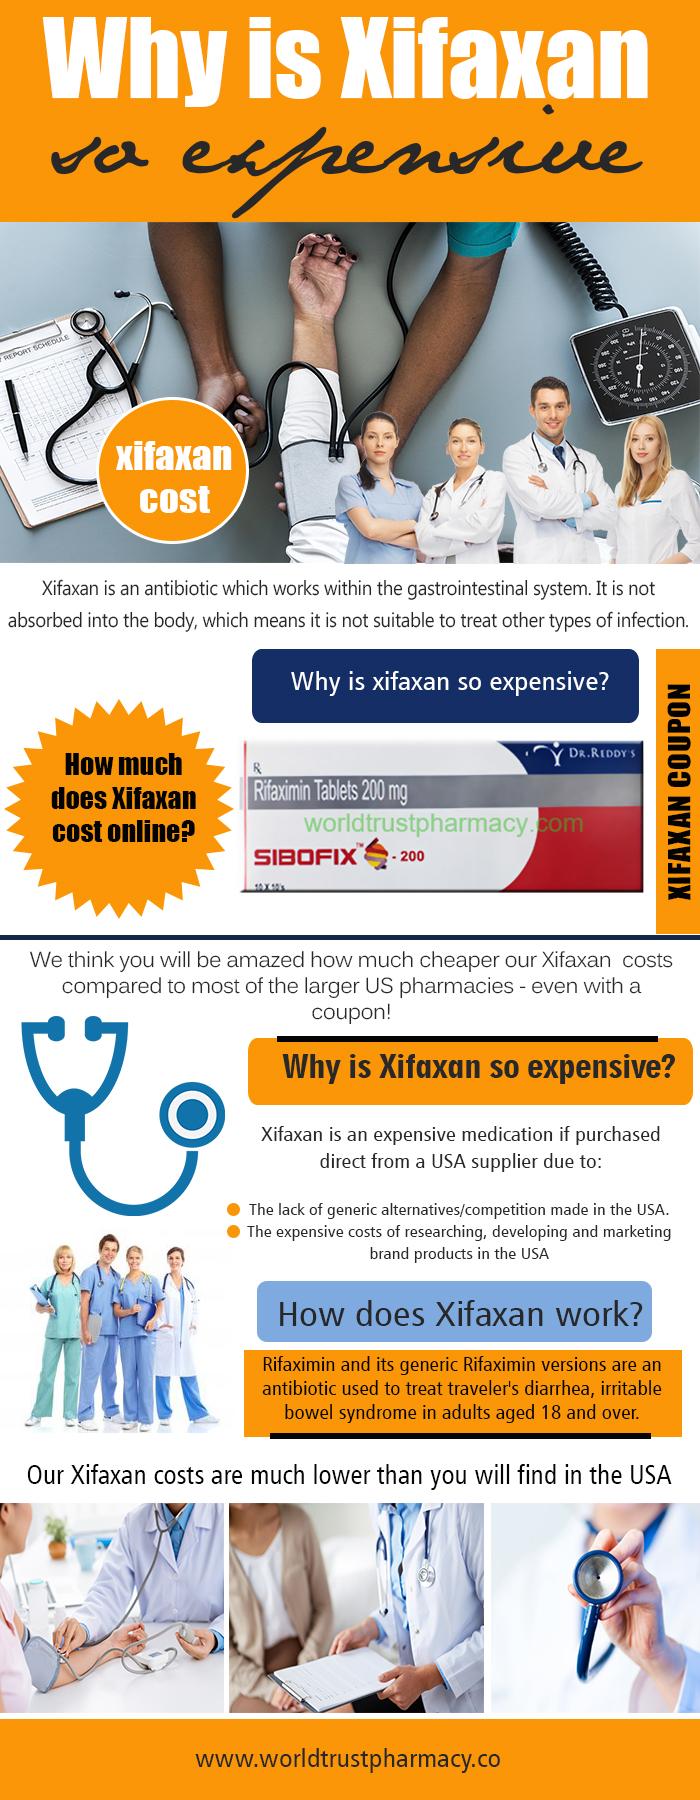 Why Is Xifaxan So Expensive